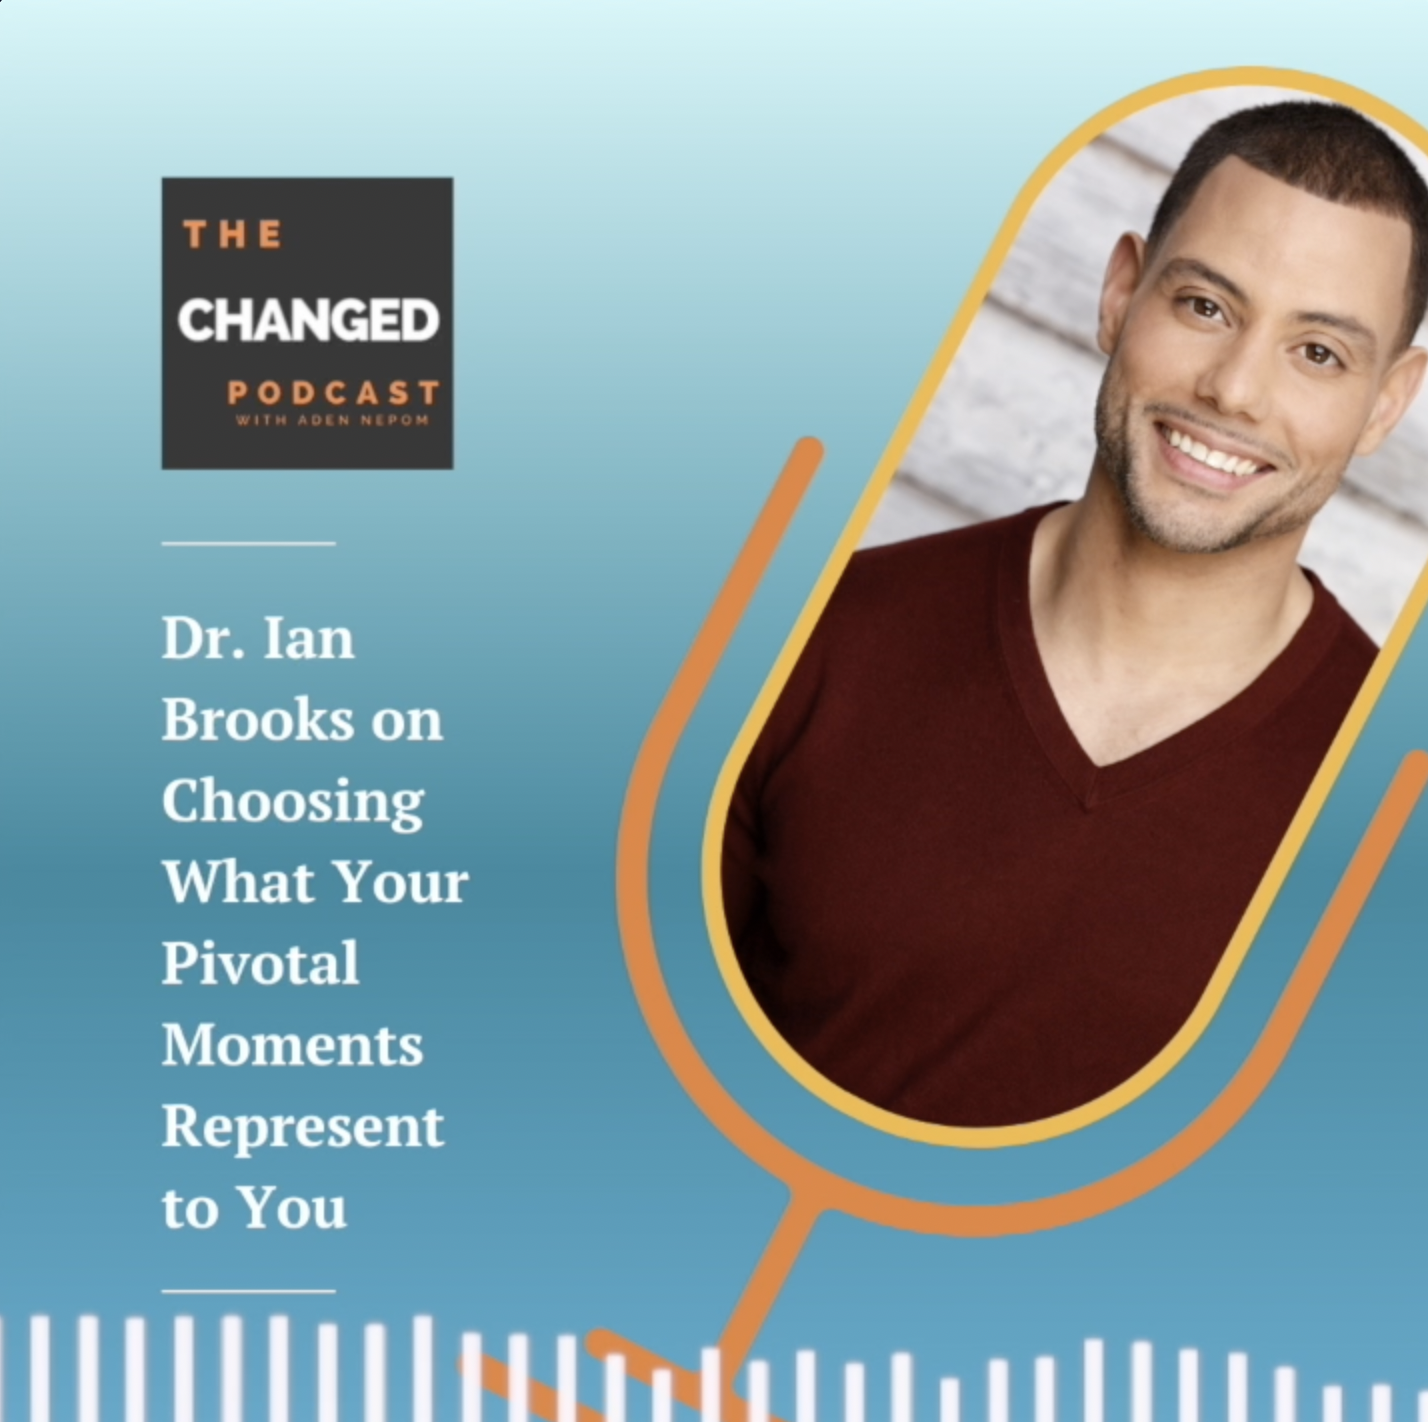 The Changed Podcast Dr. Ian Brooks